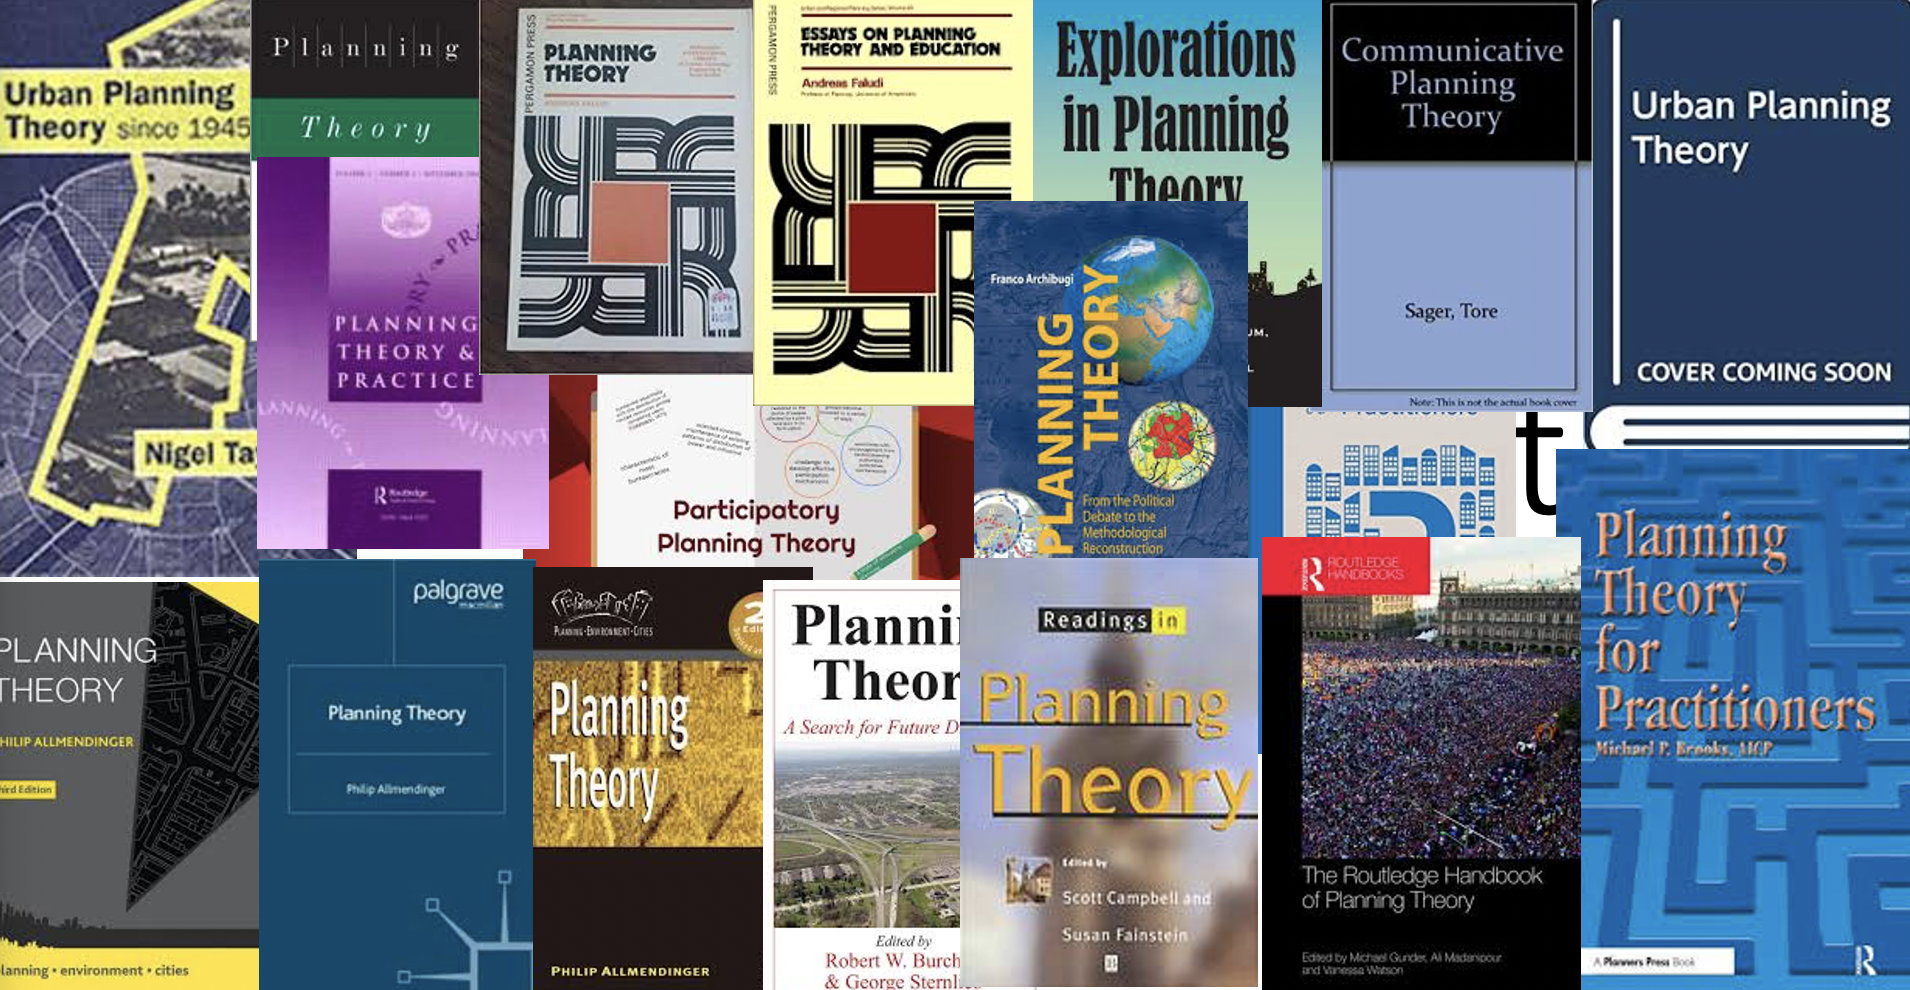 Publications in planning theory